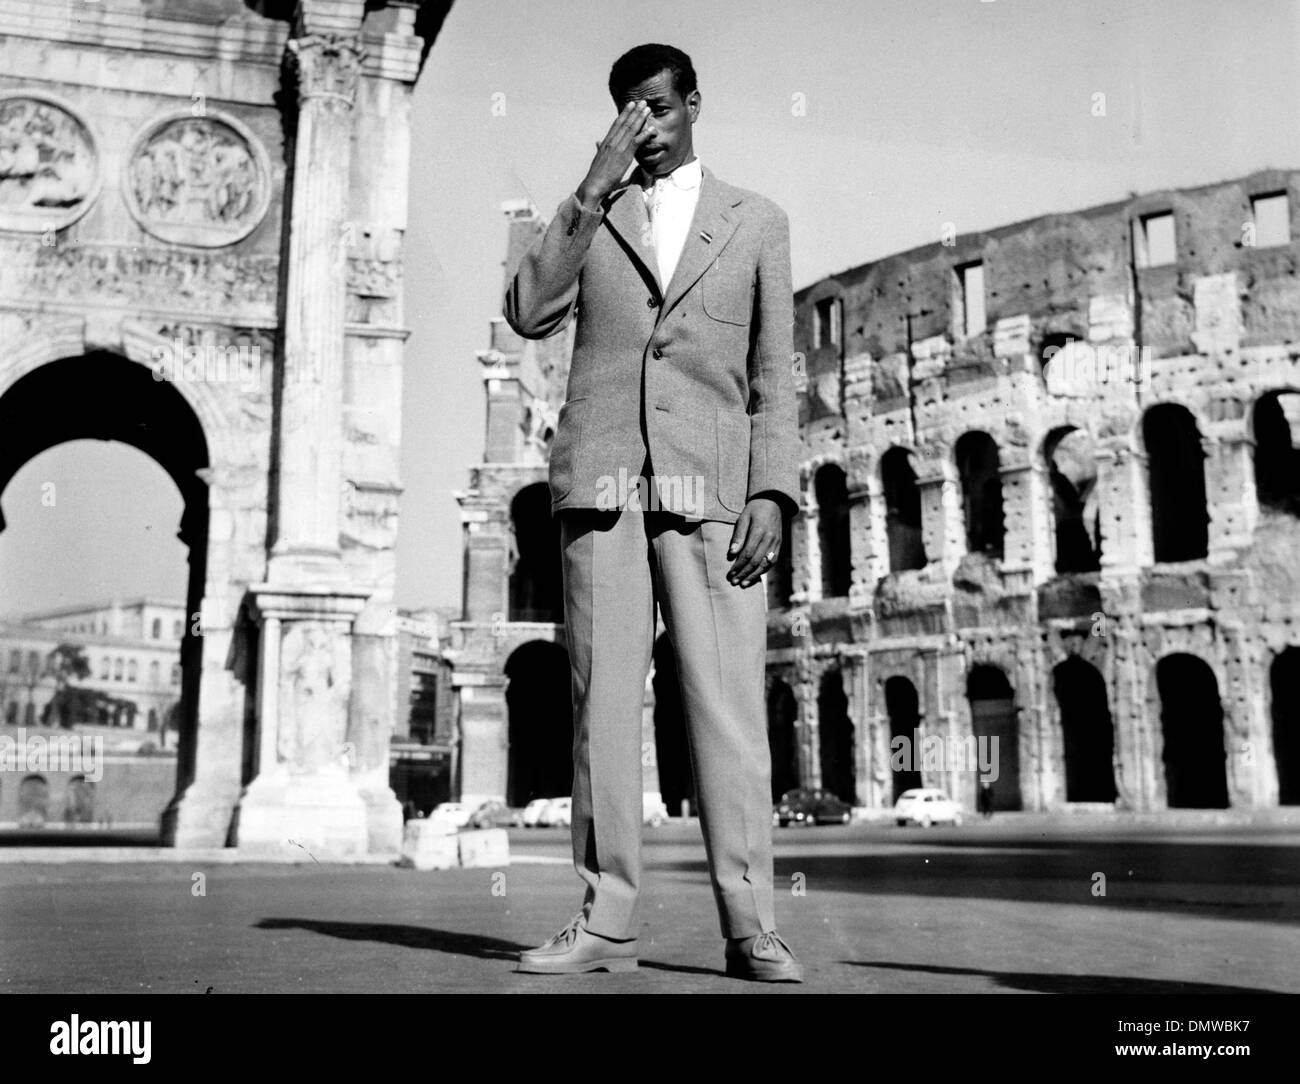 May 1, 1960 - Rome, Italy - Runner ABEBE BIKILA of Ethiopia was the first African to win an Olympics medal when he ran barefoot at the 1960 Olympics marathon in Rome. PICTURED: Bikila sightseeing in Rome during the 1960 Olympic Games.  (Credit Image: © KEYSTONE Pictures USA/ZUMAPRESS.com) Stock Photo